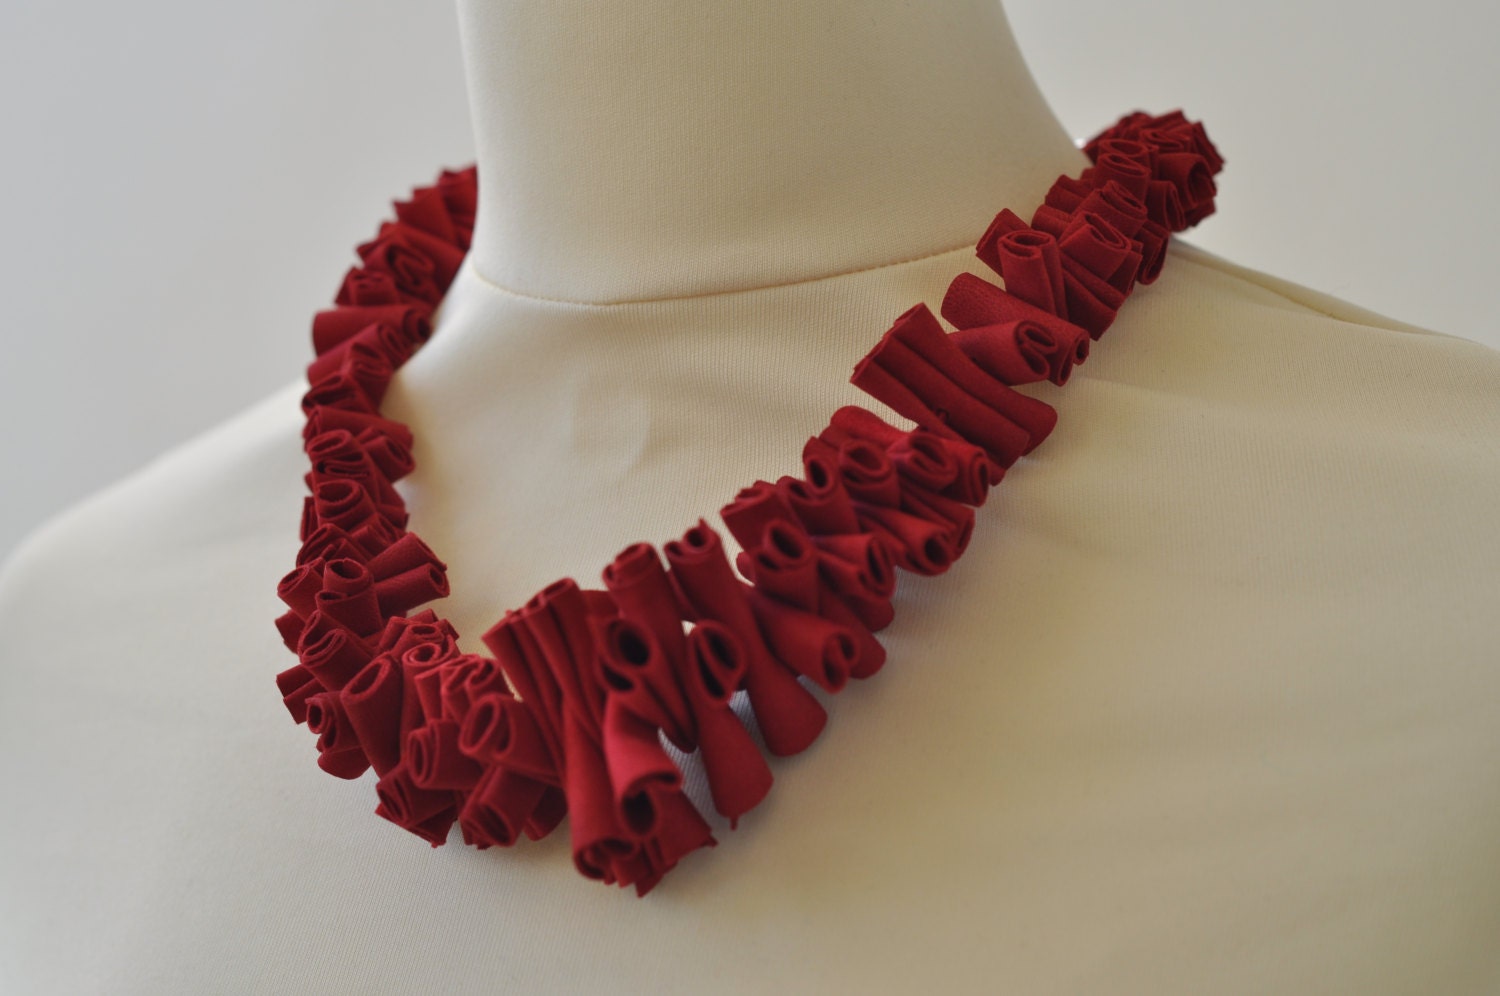 Stunning Necklace Statement Red Leather Necklace - Etsy